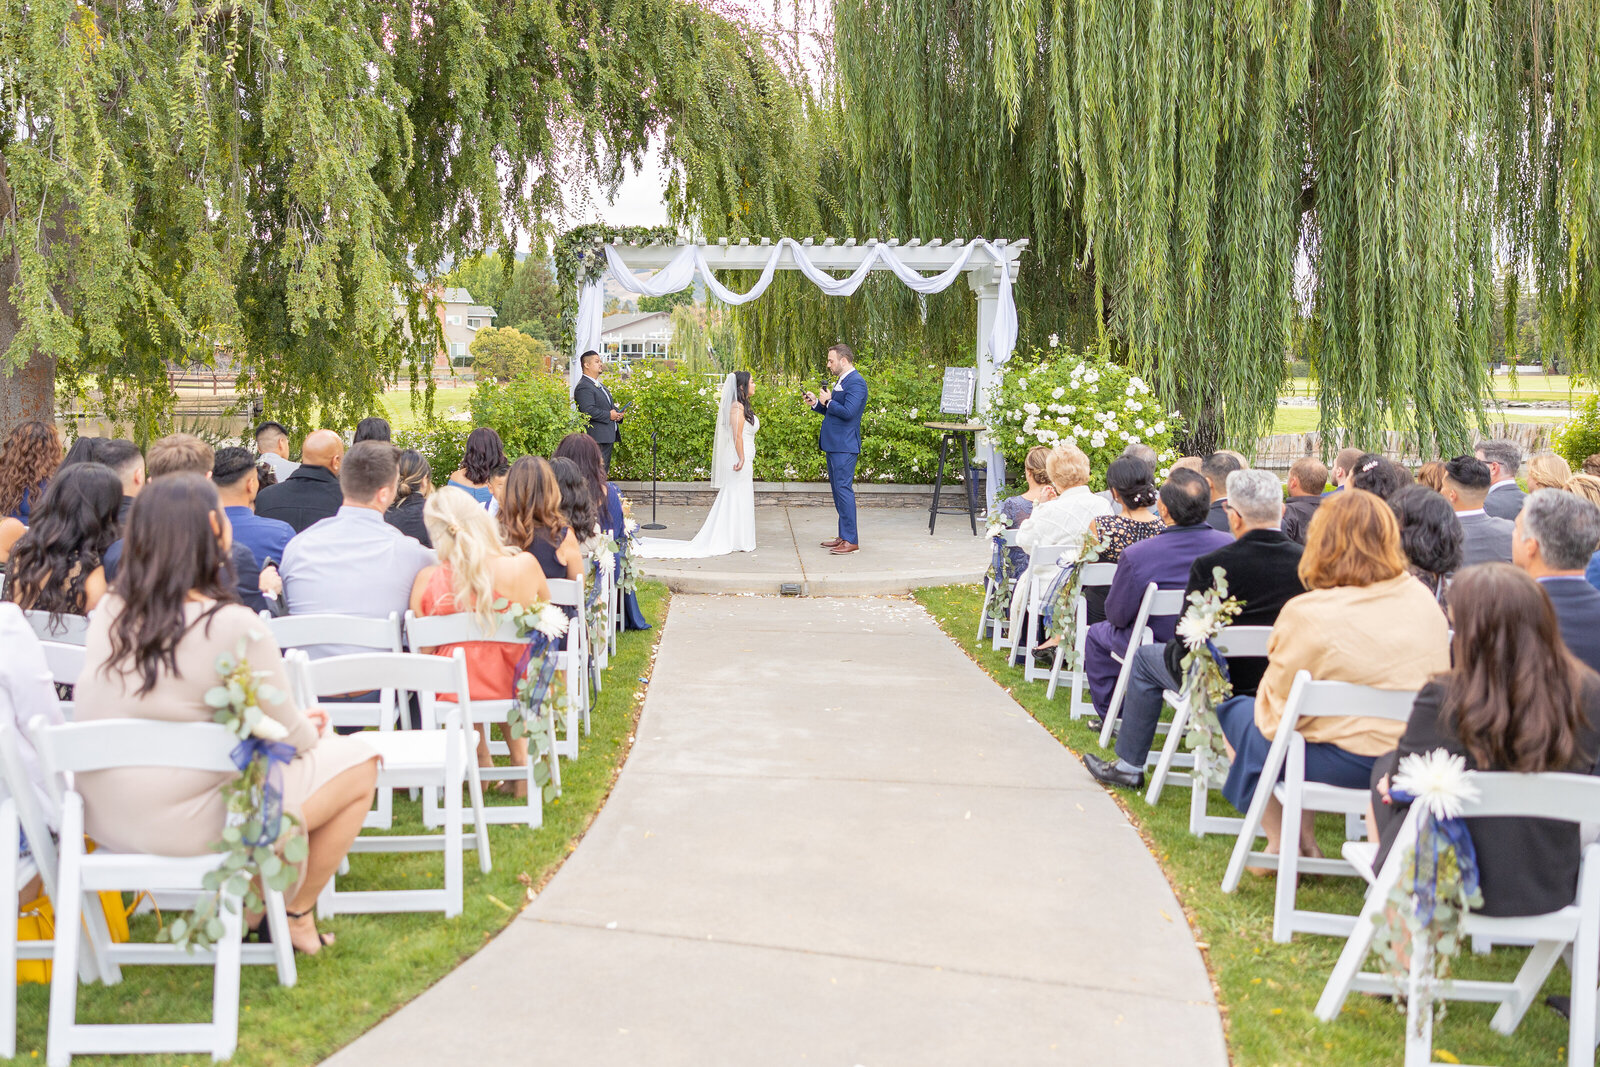 Couple giving their vows at wedding ceremony with guests looking on and willow trees in their background. photo by wedding photographer sacramento ca, philippe studio pro